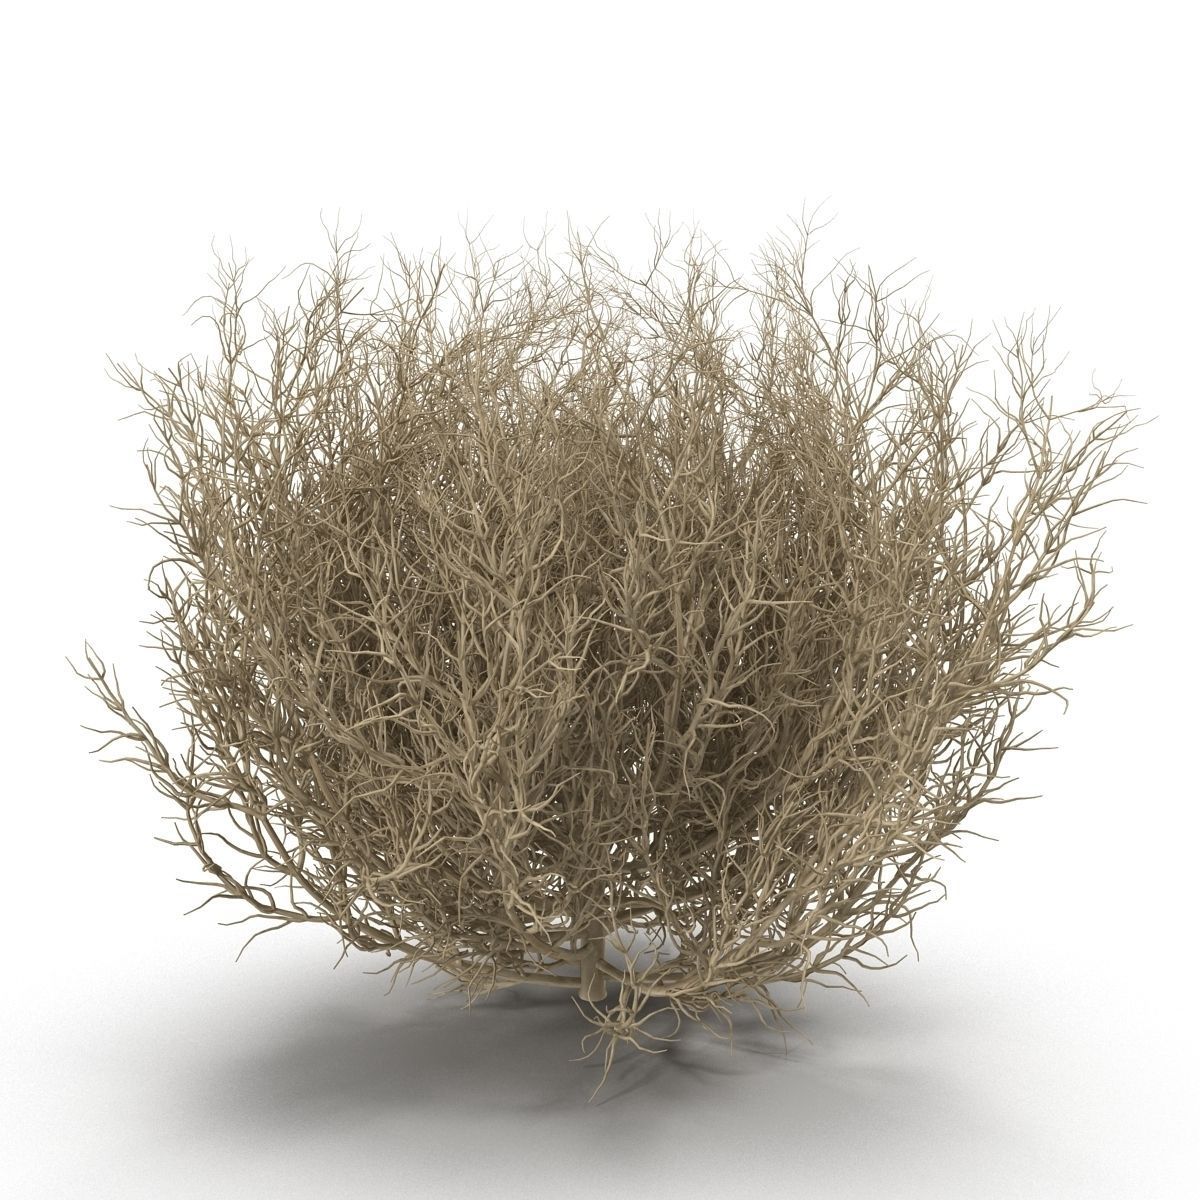 Tumble Weed Png (+).